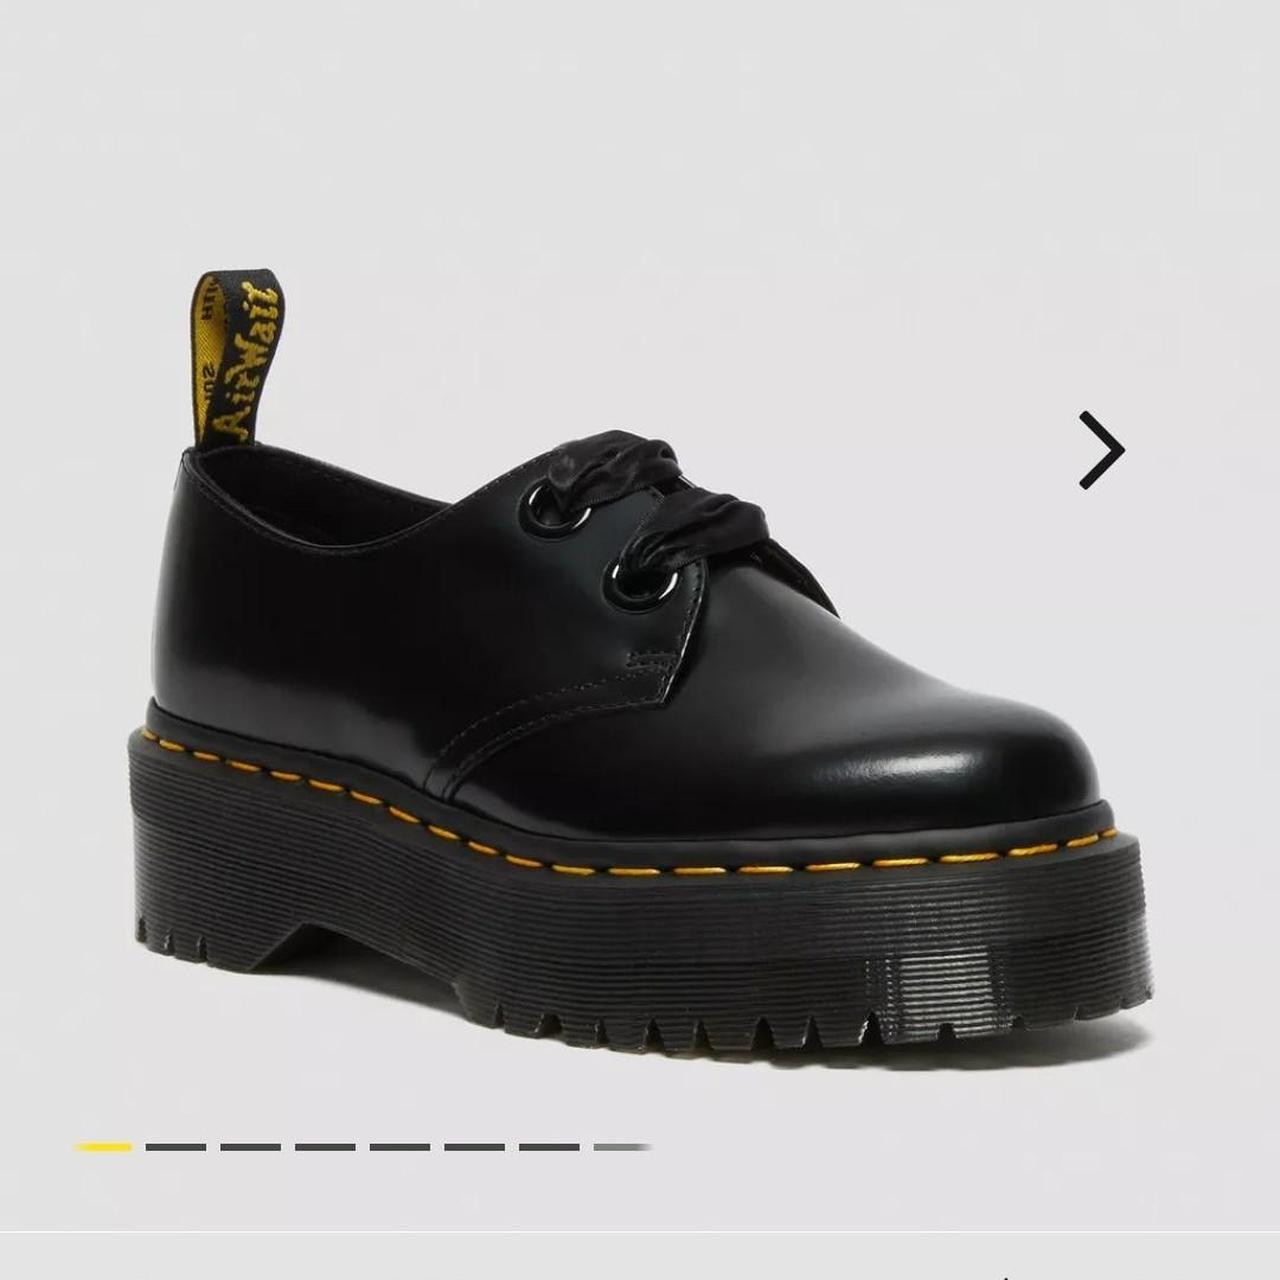 DEADSTOCK NEW HOLLY DOC MARTENS!! ☆ These shoes are... - Depop